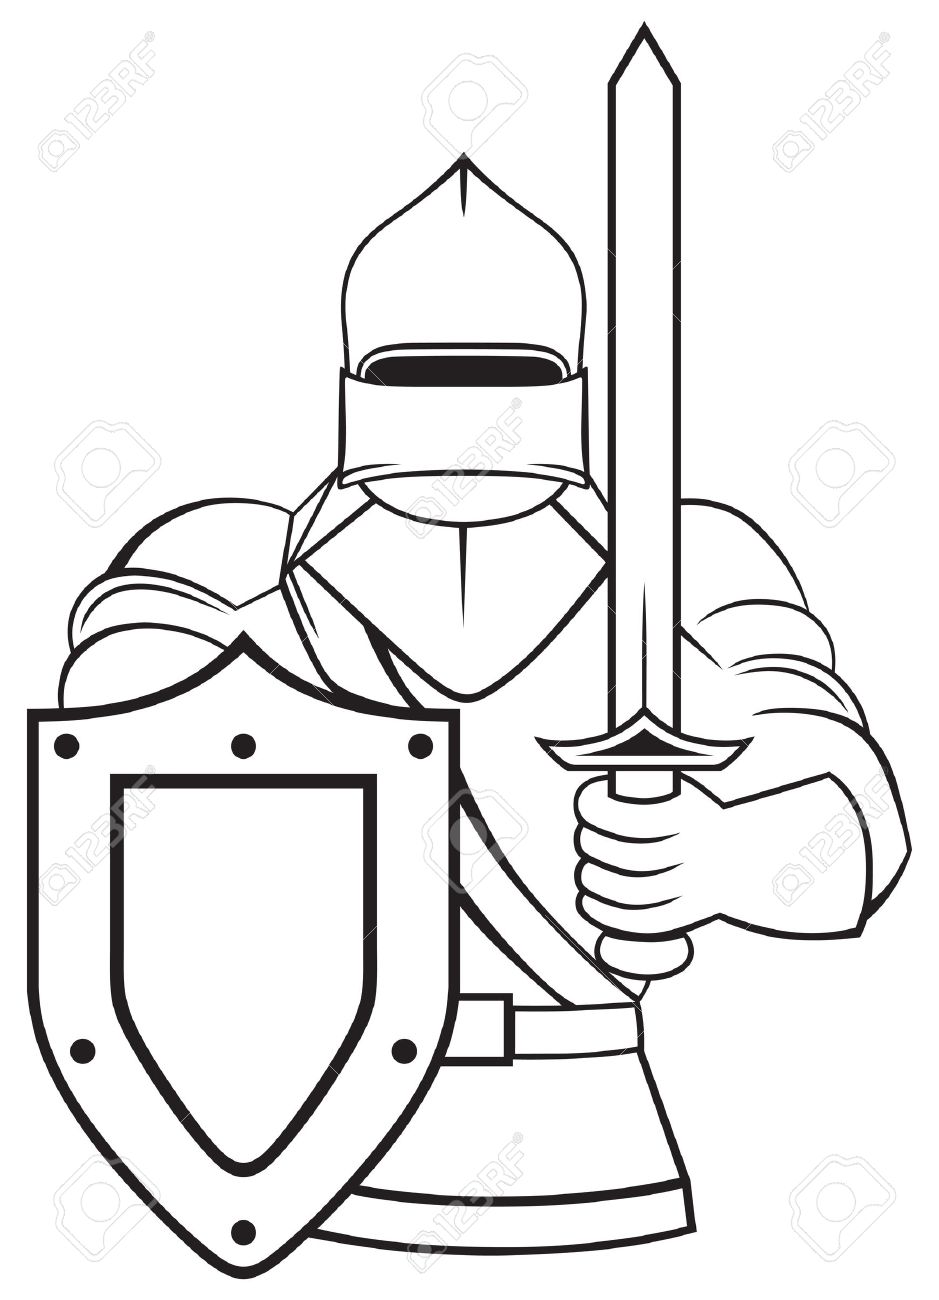 Medieval knight isolated on white background royalty free svg cliparts vectors and stock illustration image